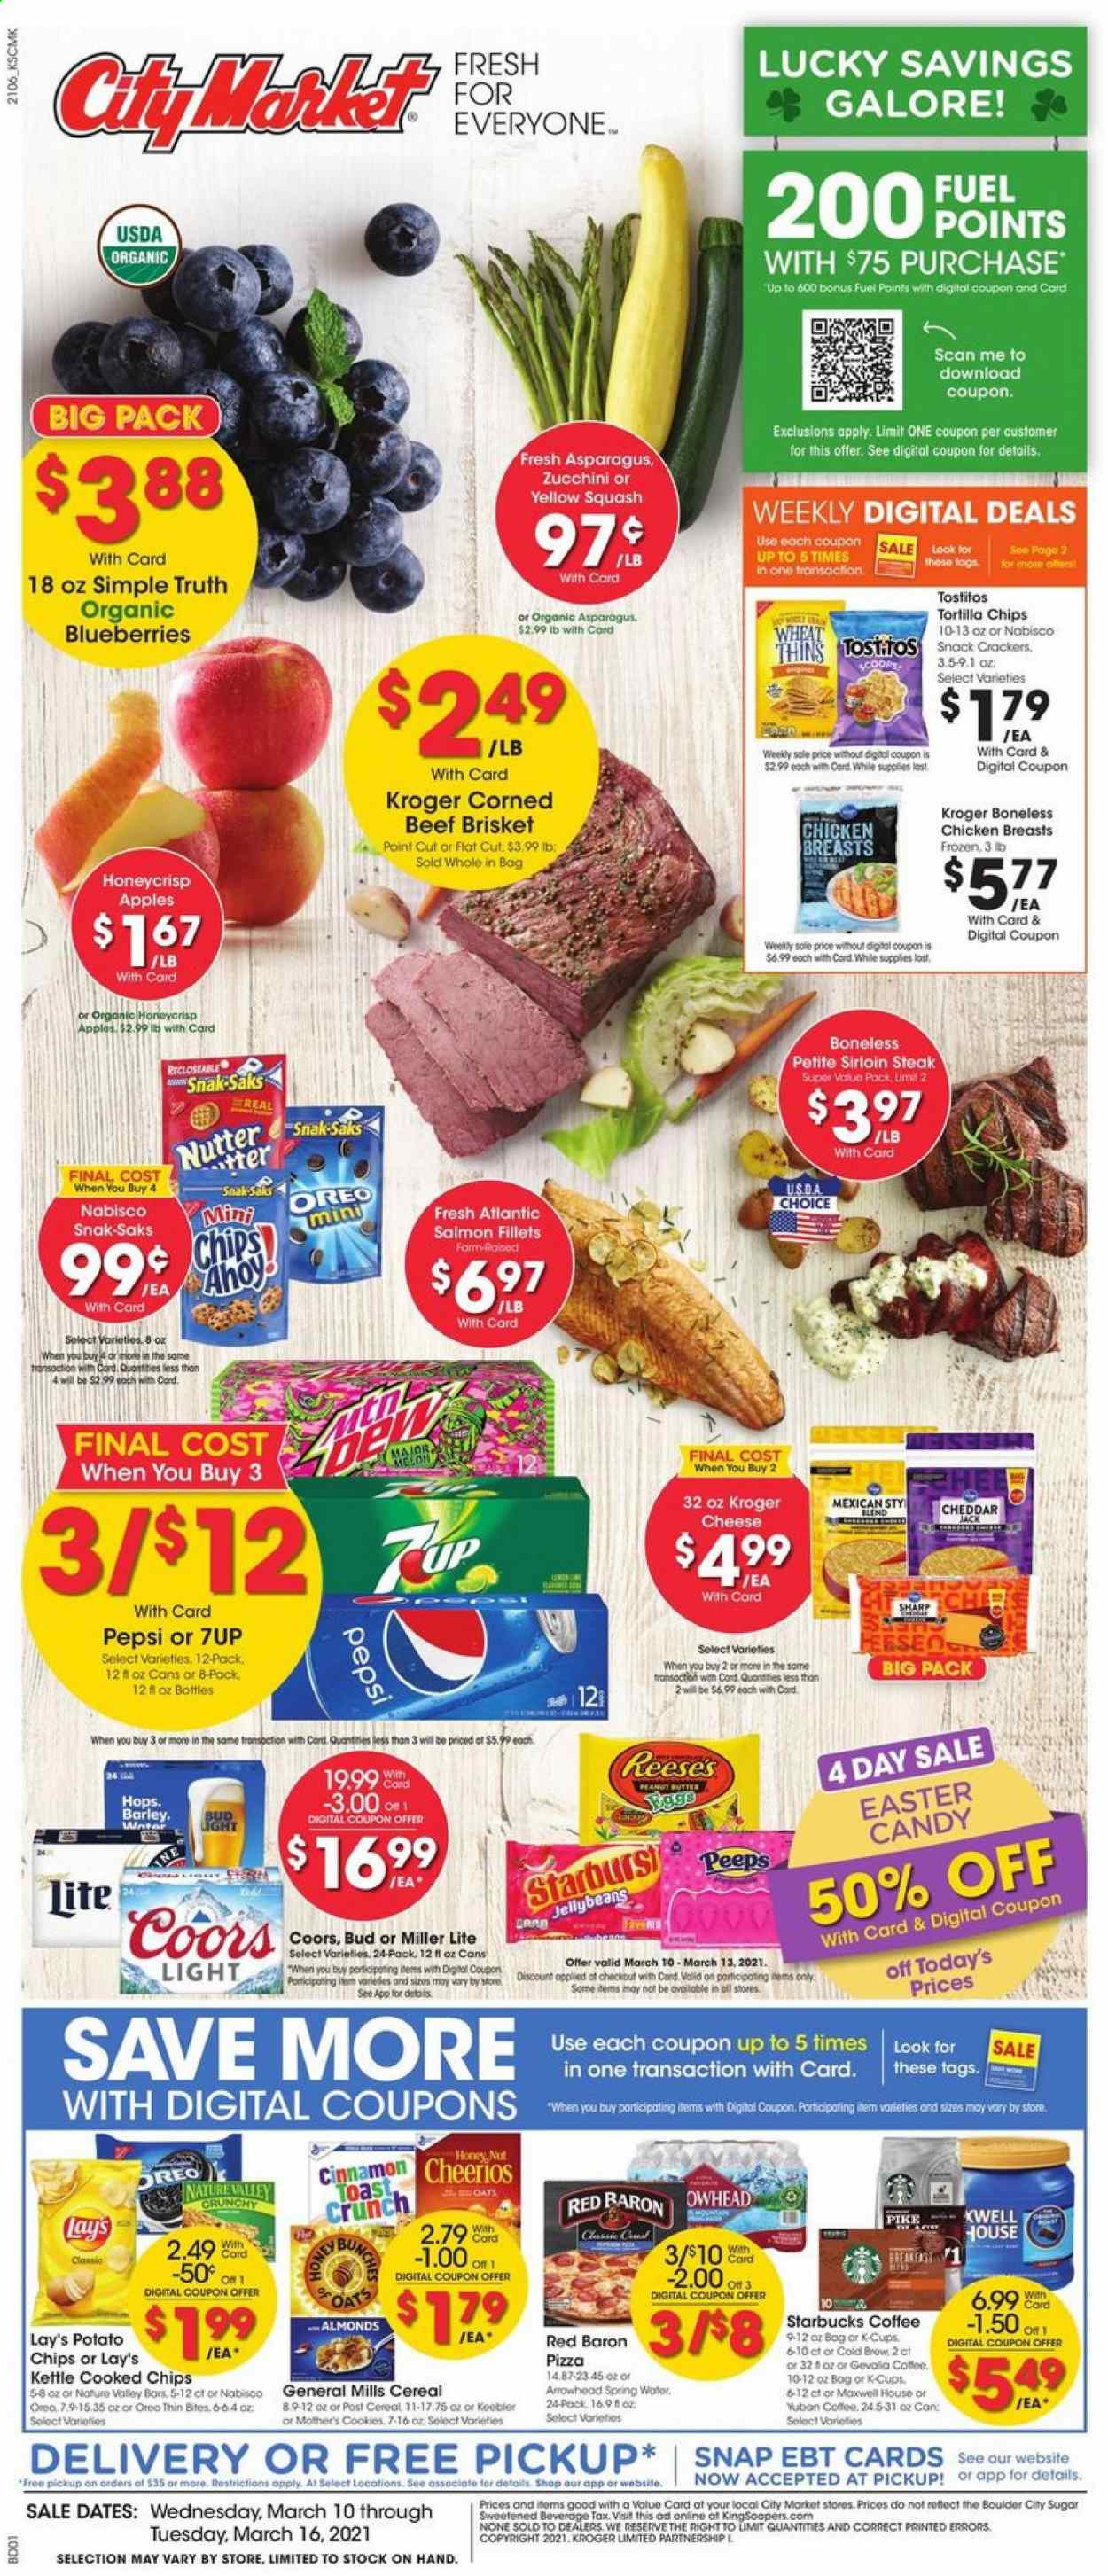 thumbnail - City Market Flyer - 03/10/2021 - 03/16/2021 - Sales products - blueberries, toast bread, apples, salmon, salmon fillet, northern pike, pizza, cheddar, cheese, Oreo, eggs, Reese's, zucchini, Red Baron, cookies, crackers, Keebler, Peeps, tortilla chips, potato chips, snack, Lay’s, Thins, Tostitos, oats, cereals, Cheerios, Nature Valley, almonds, Pepsi, 7UP, spring water, coffee, Starbucks, coffee capsules, K-Cups, Gevalia, beer, Miller Lite, Coors, chicken breasts, beef meat, beef sirloin, corned beef, steak, sirloin steak, beef brisket, Sharp. Page 1.